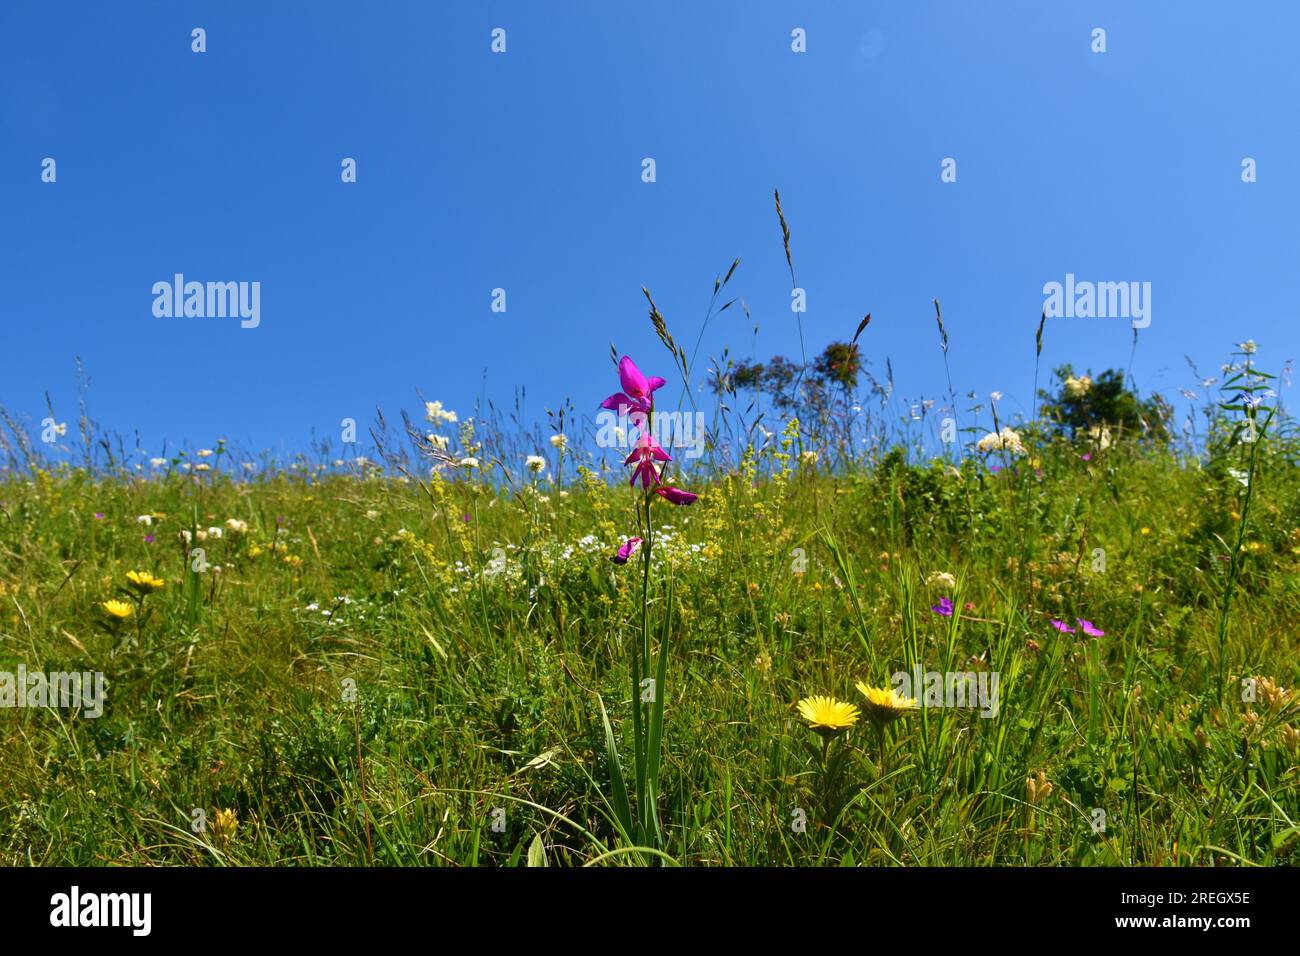 Pink Gladiolus imbricatus flower on a colorful meadow with white and yellow flowers Stock Photo